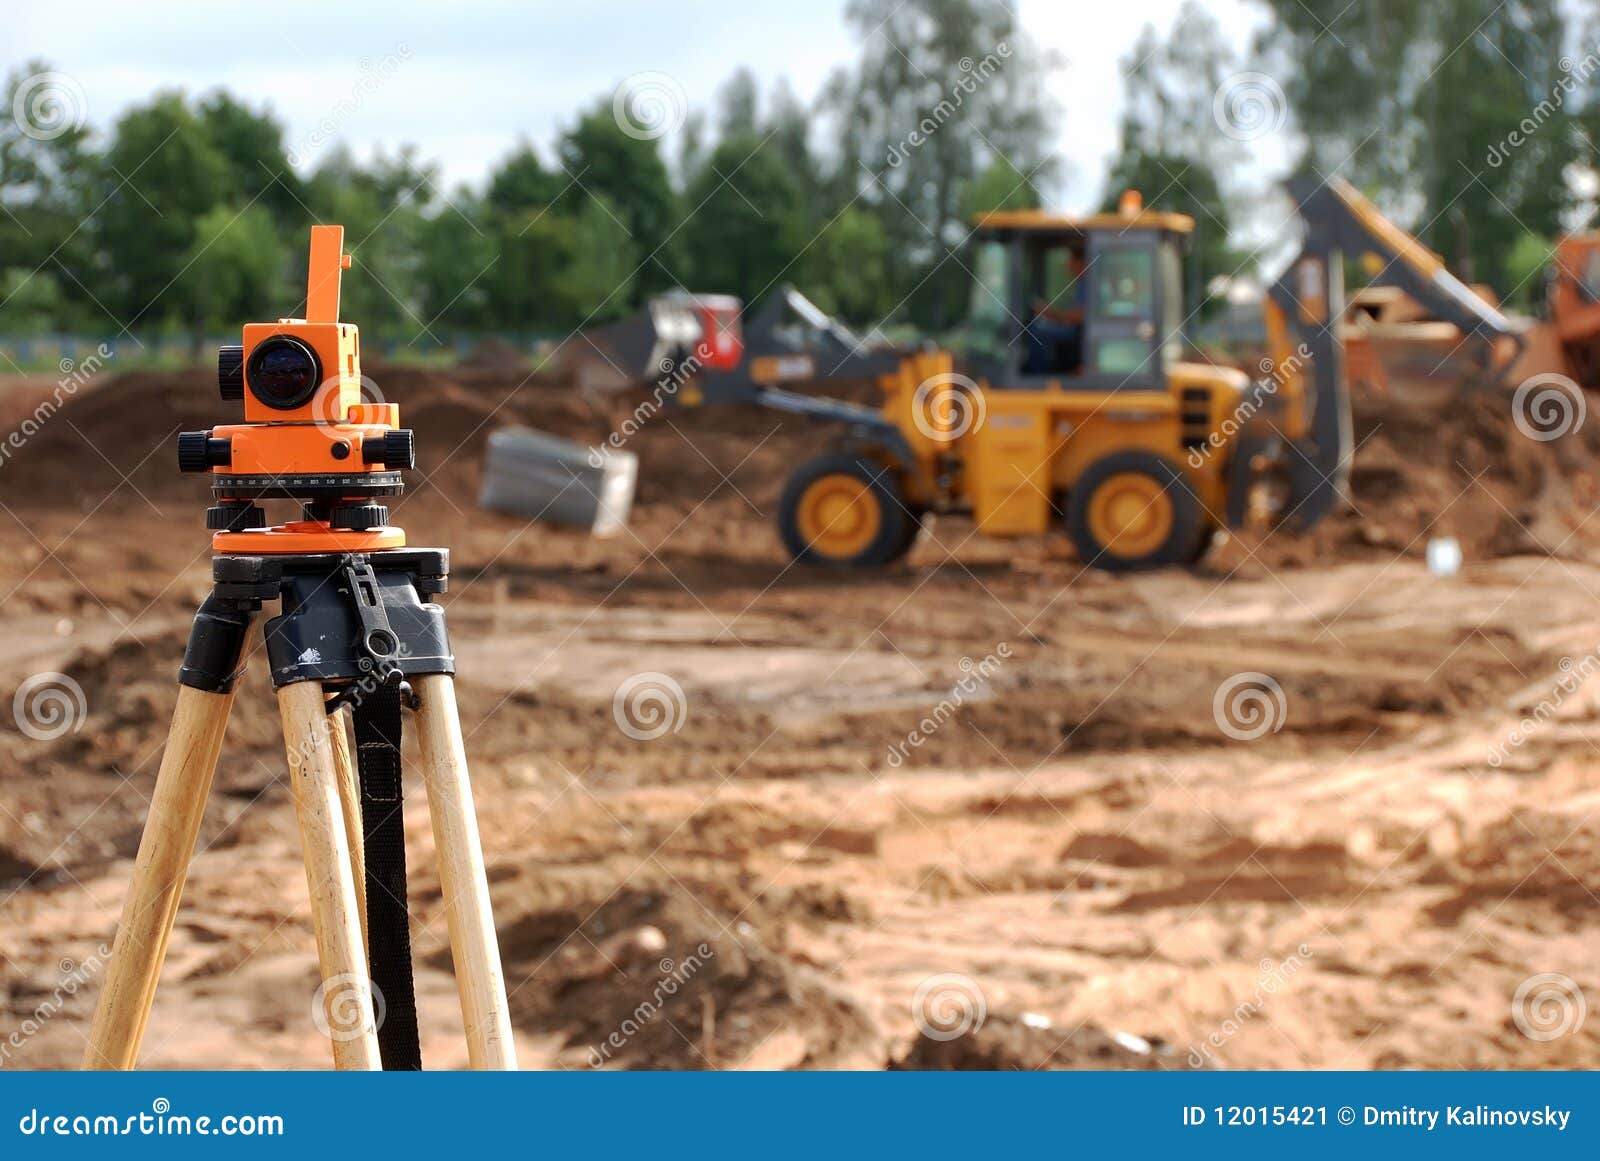 theodolite at construction site